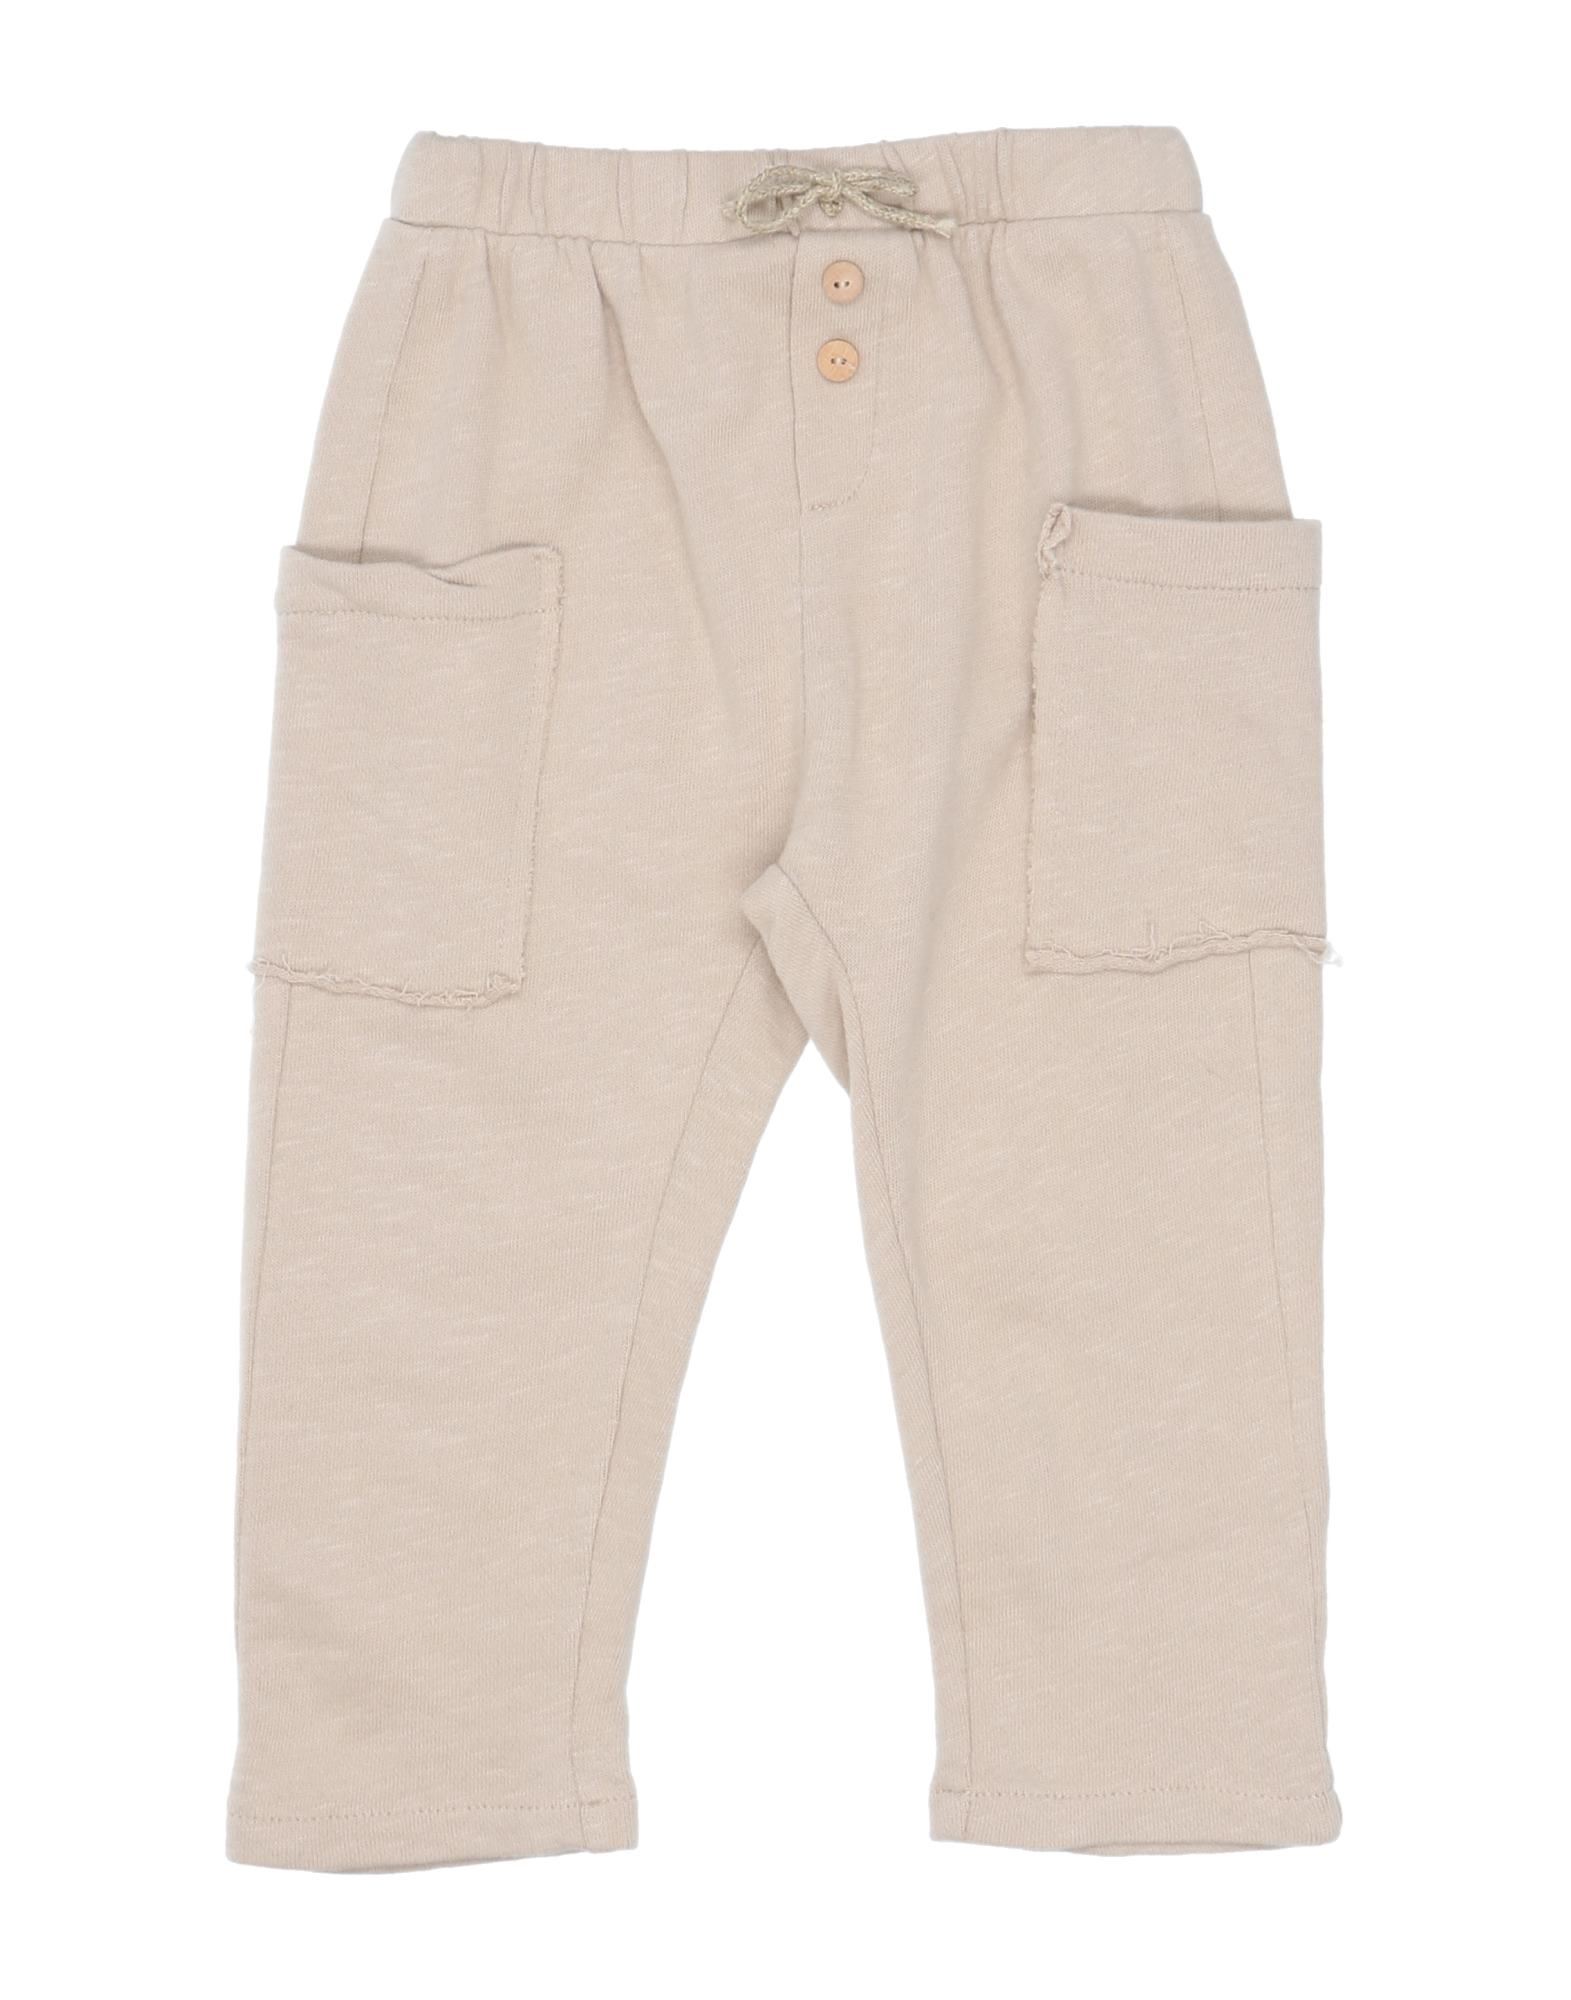 PLAY UP Casual pants - Item 13541923